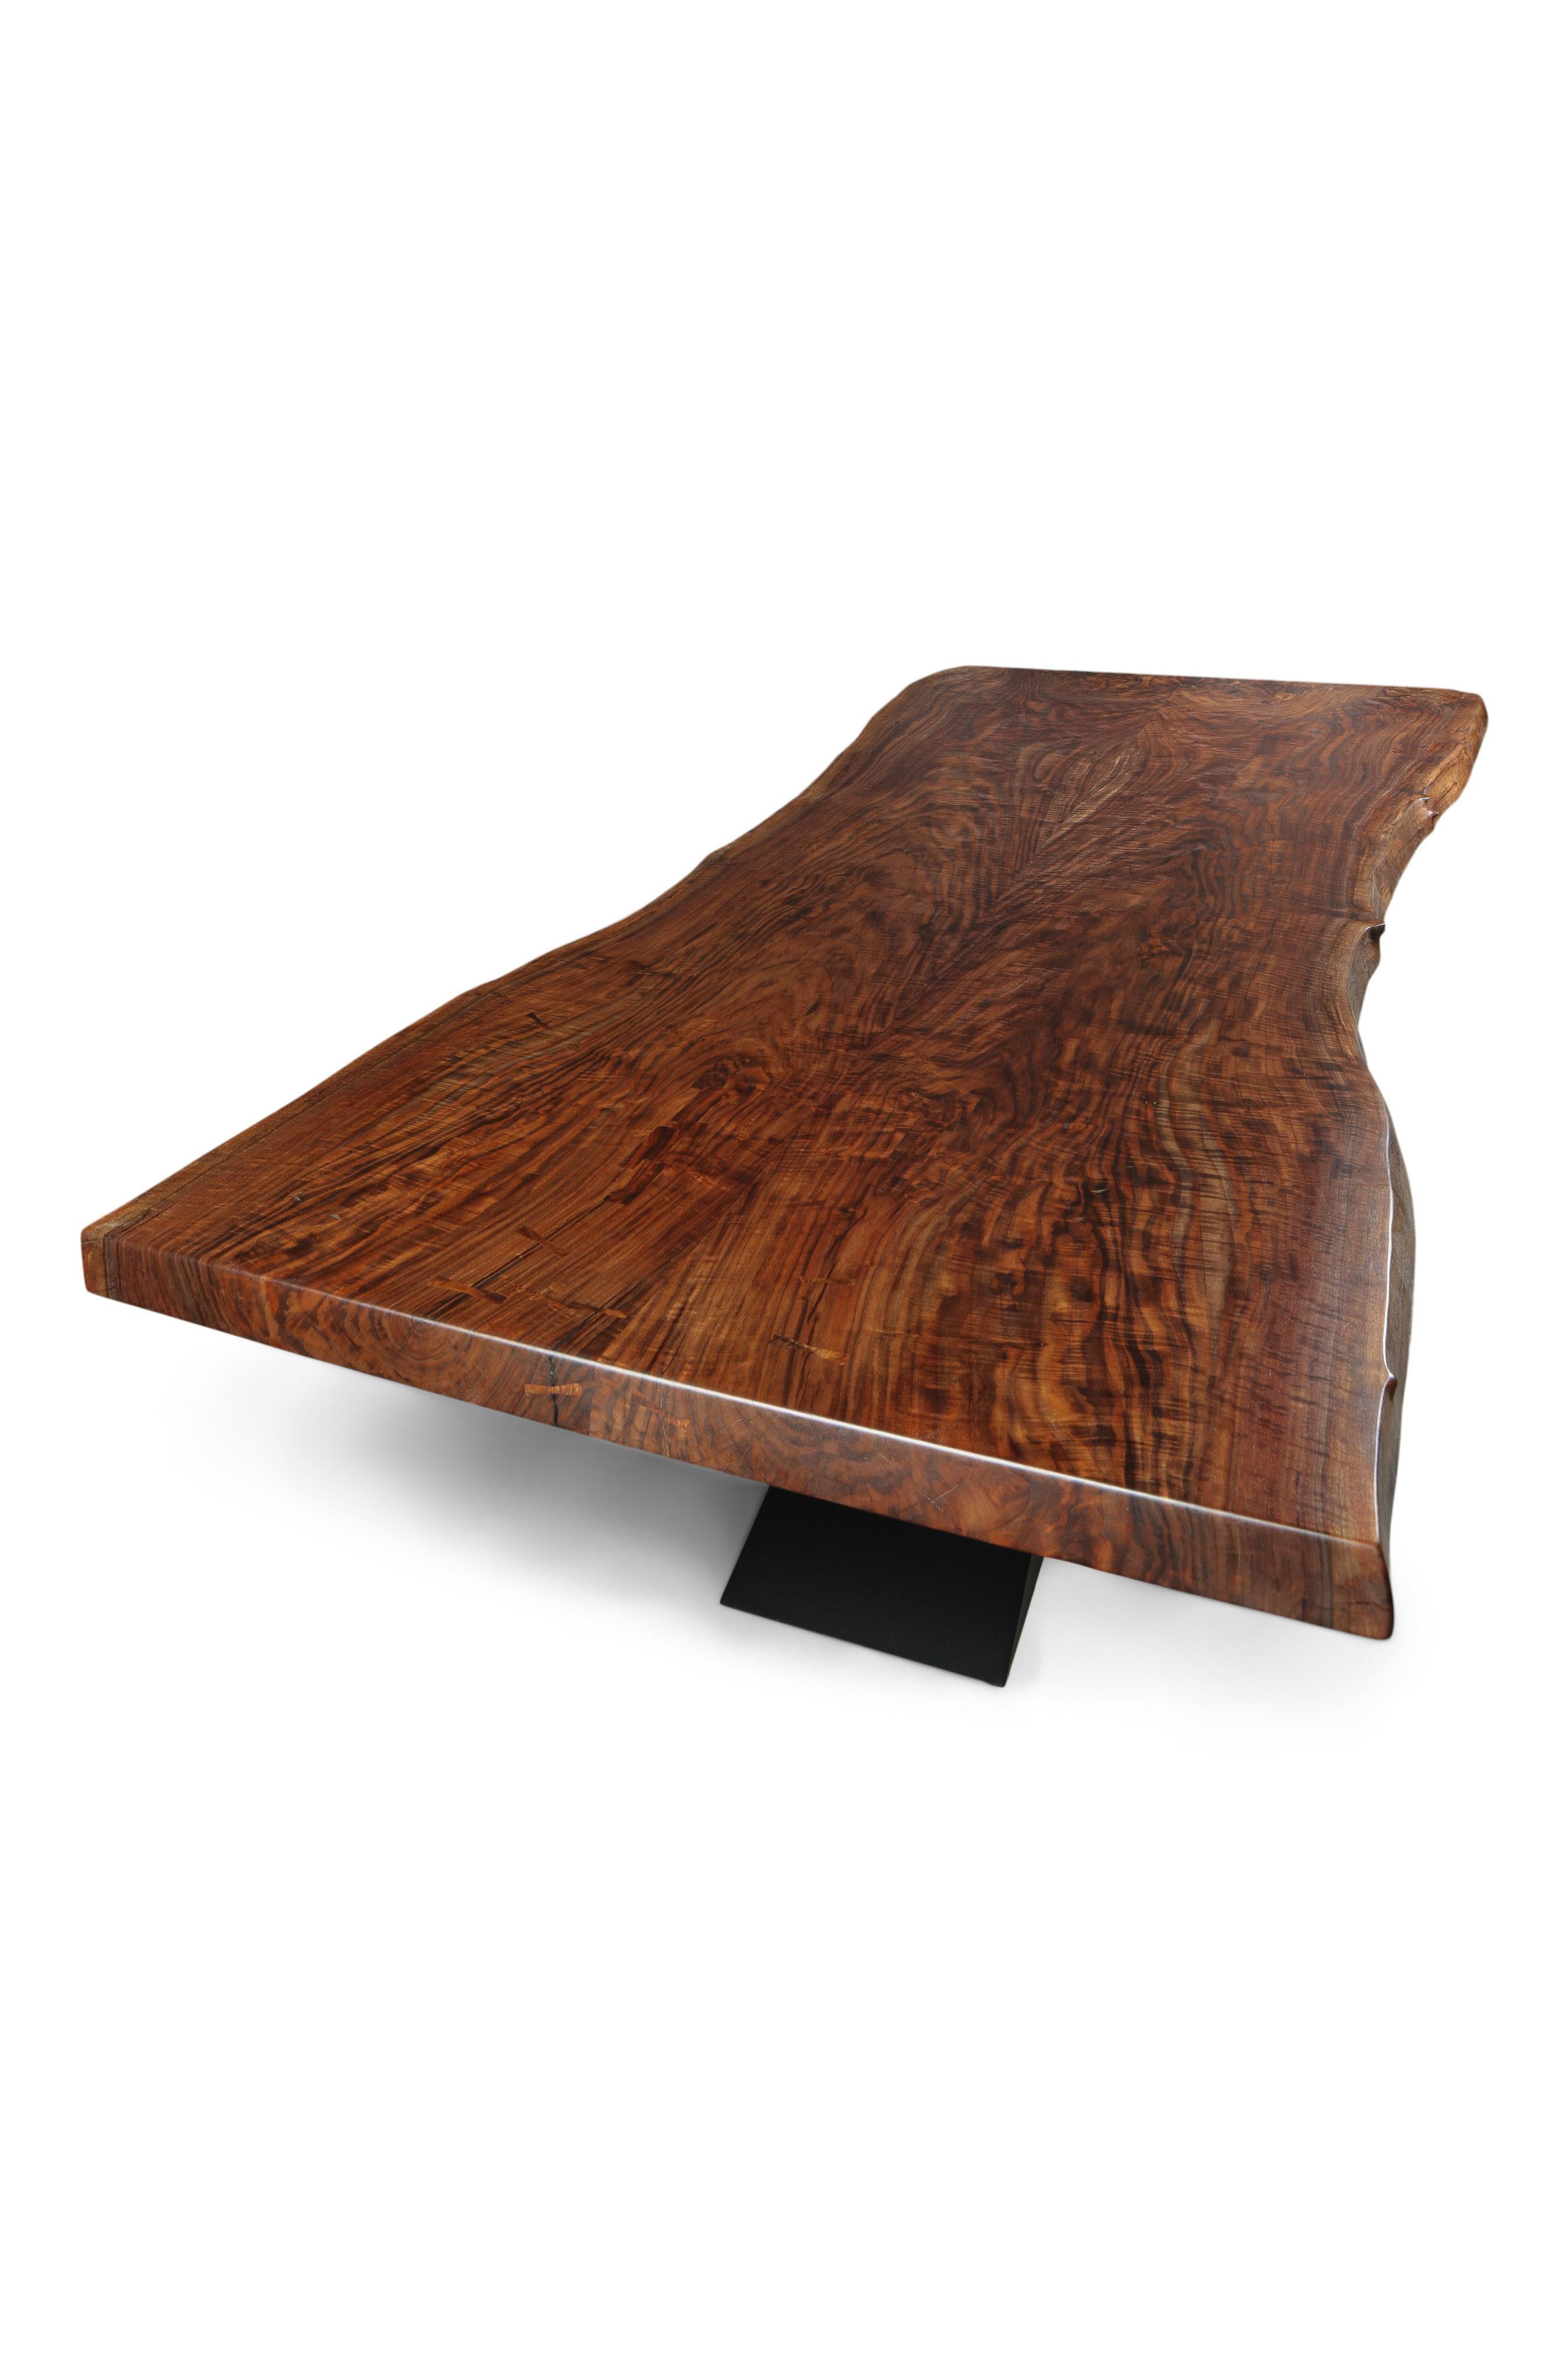 cantilever table